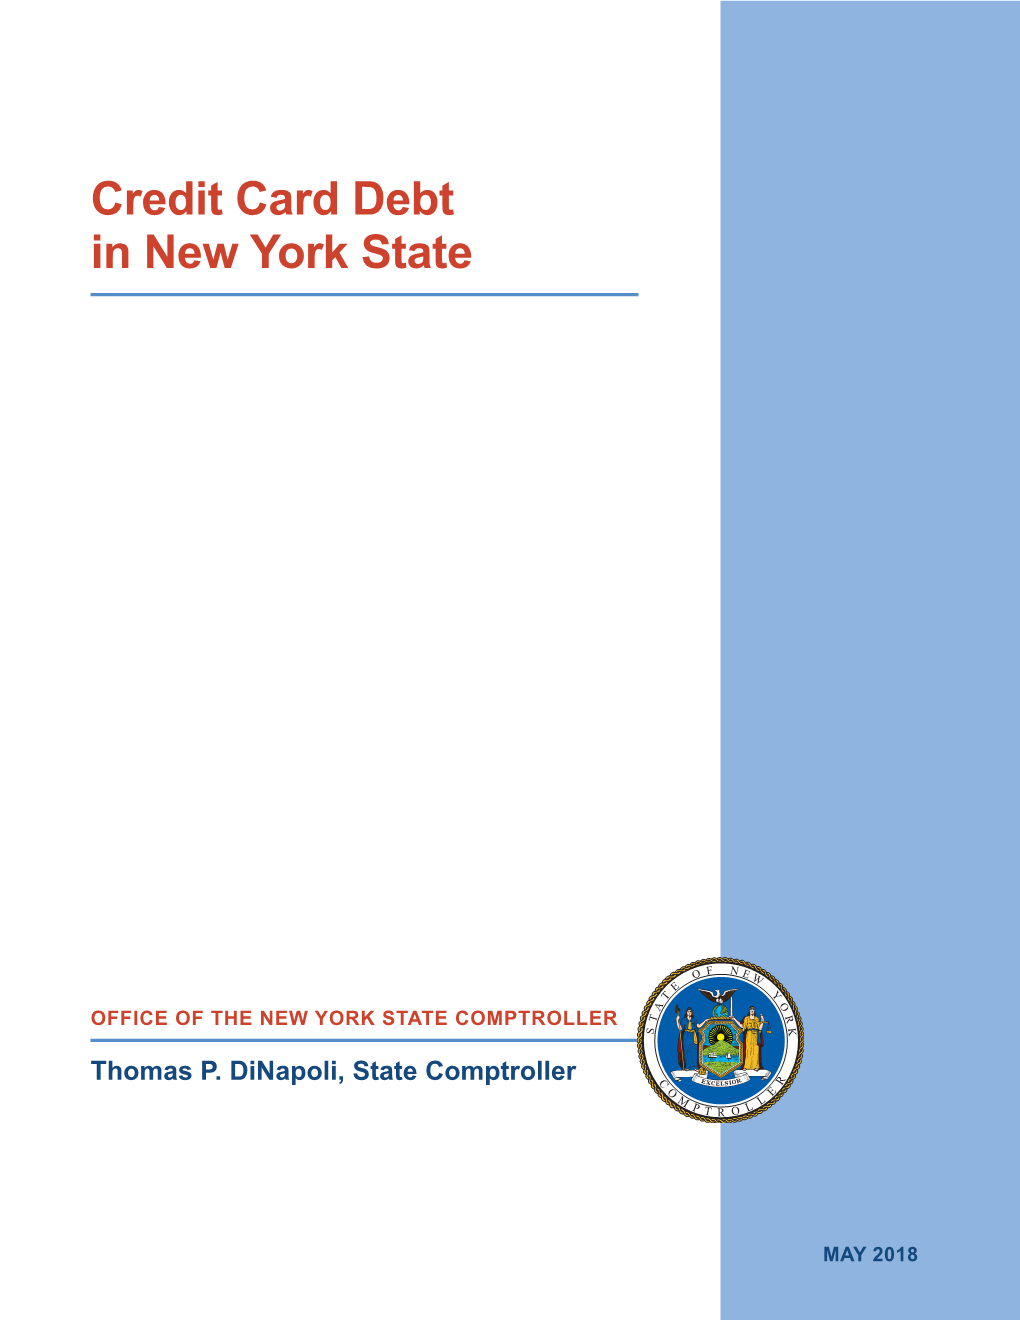 Credit Card Debt in New York State, May 2018